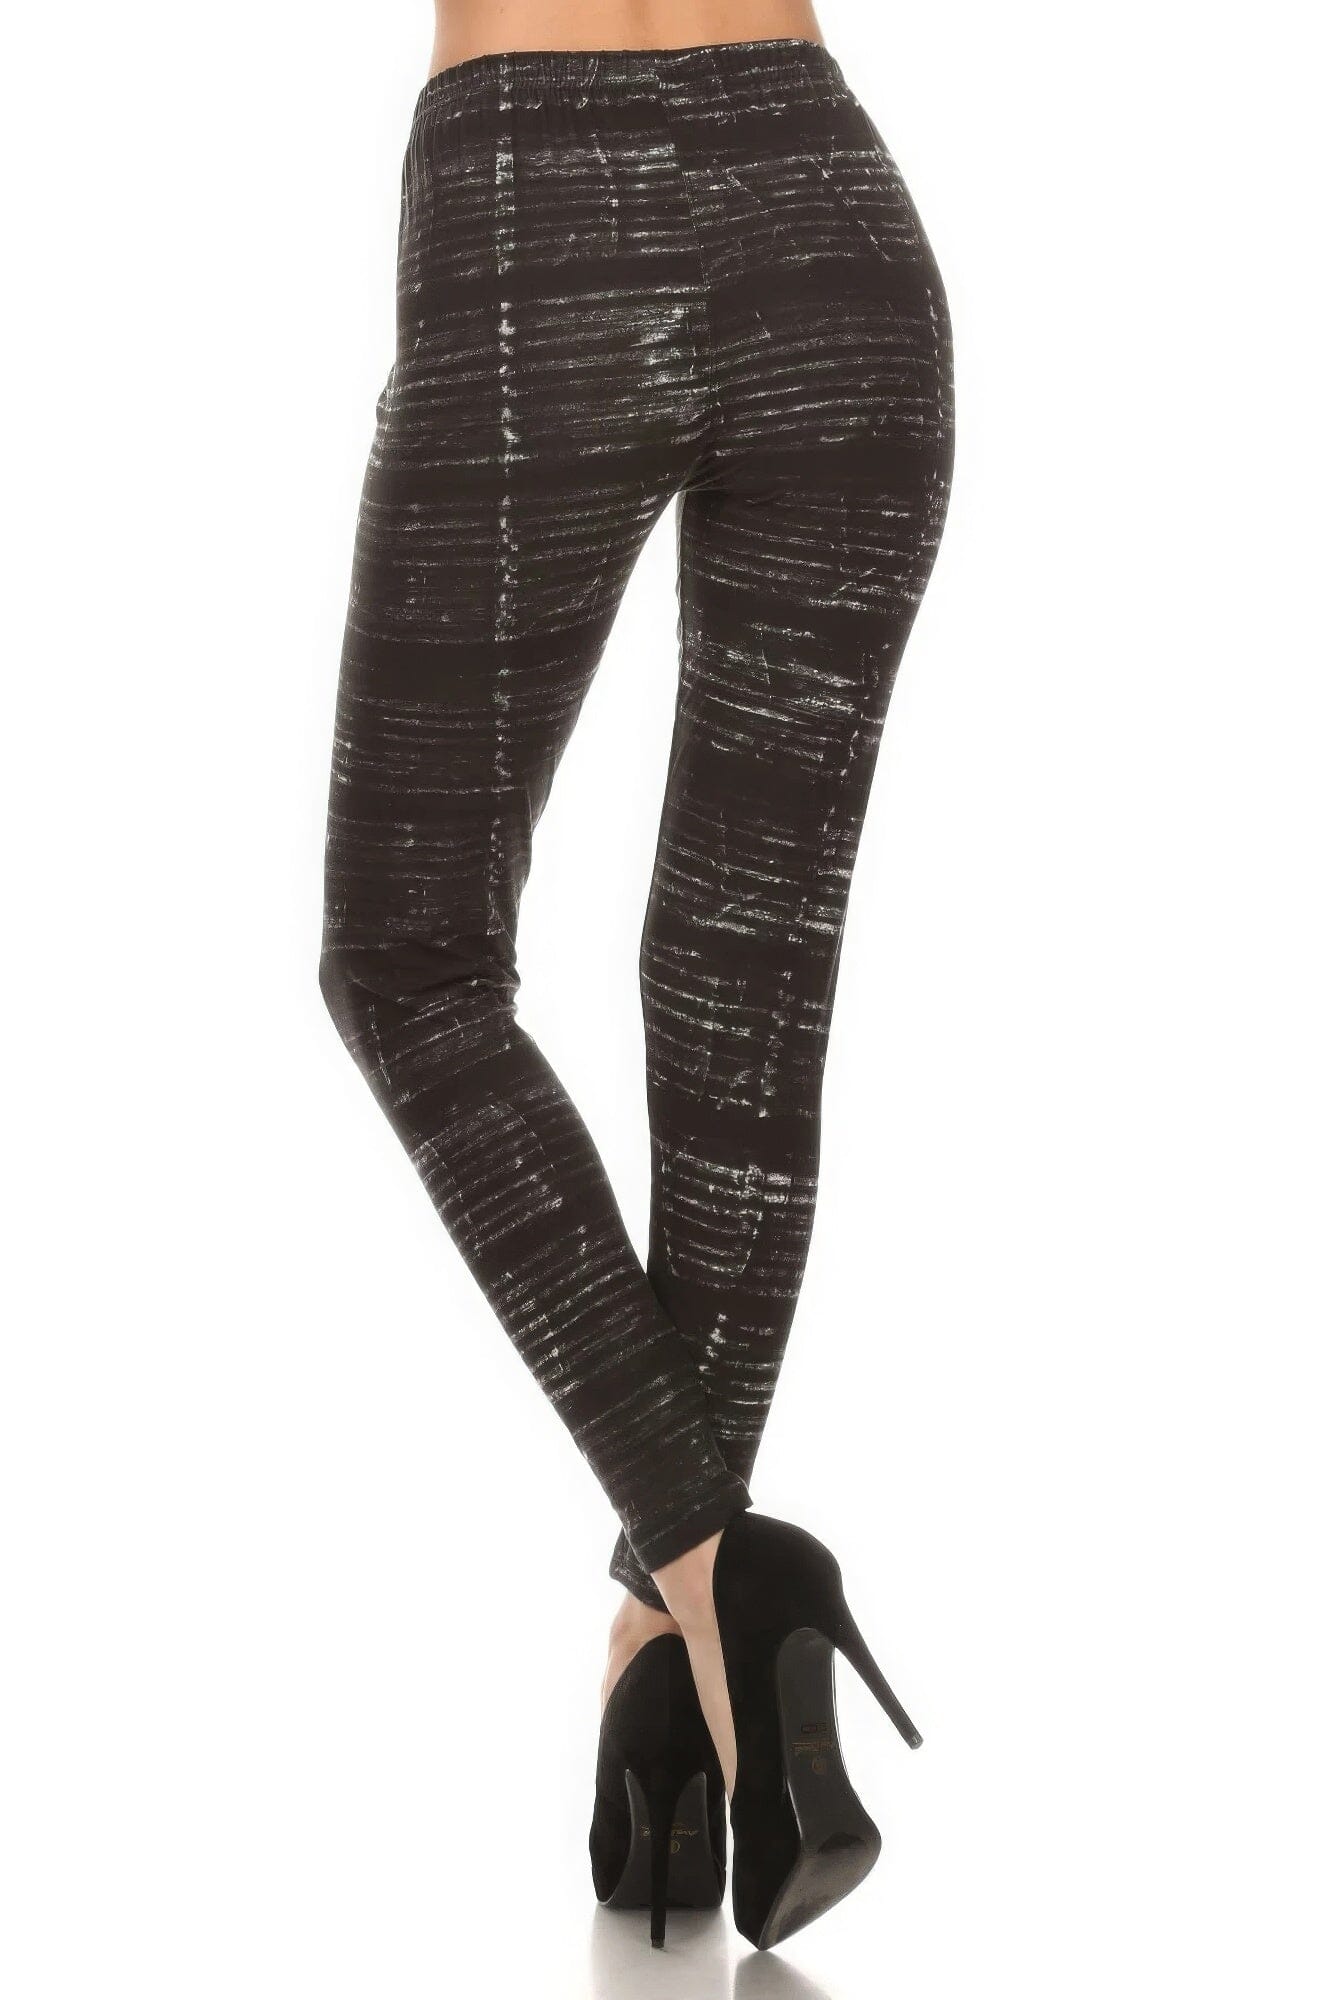 Black Tie Dye Print In A Fitted Style With A Banded High Waist Full Length Leggings Pants jehouze 